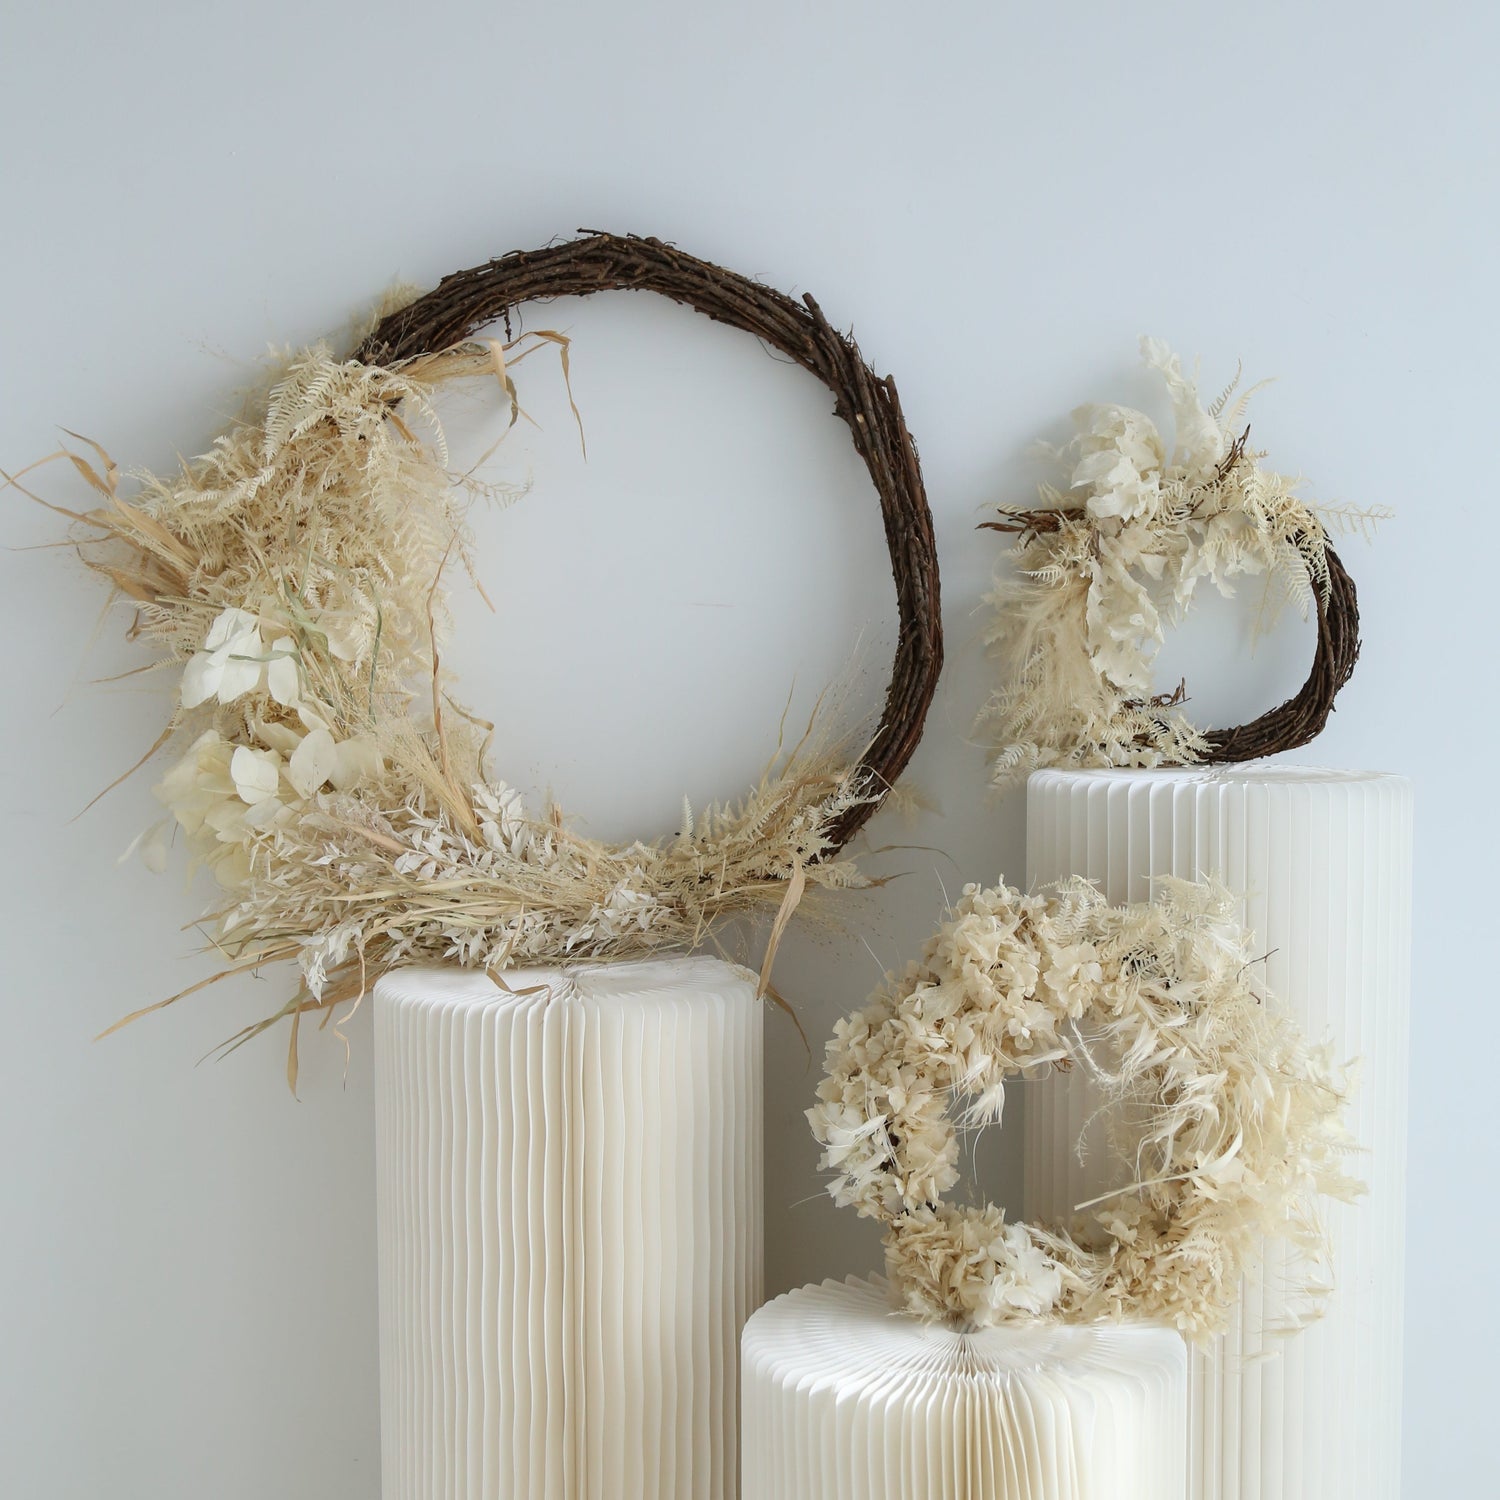 Photo is an example of a rustic wreath.